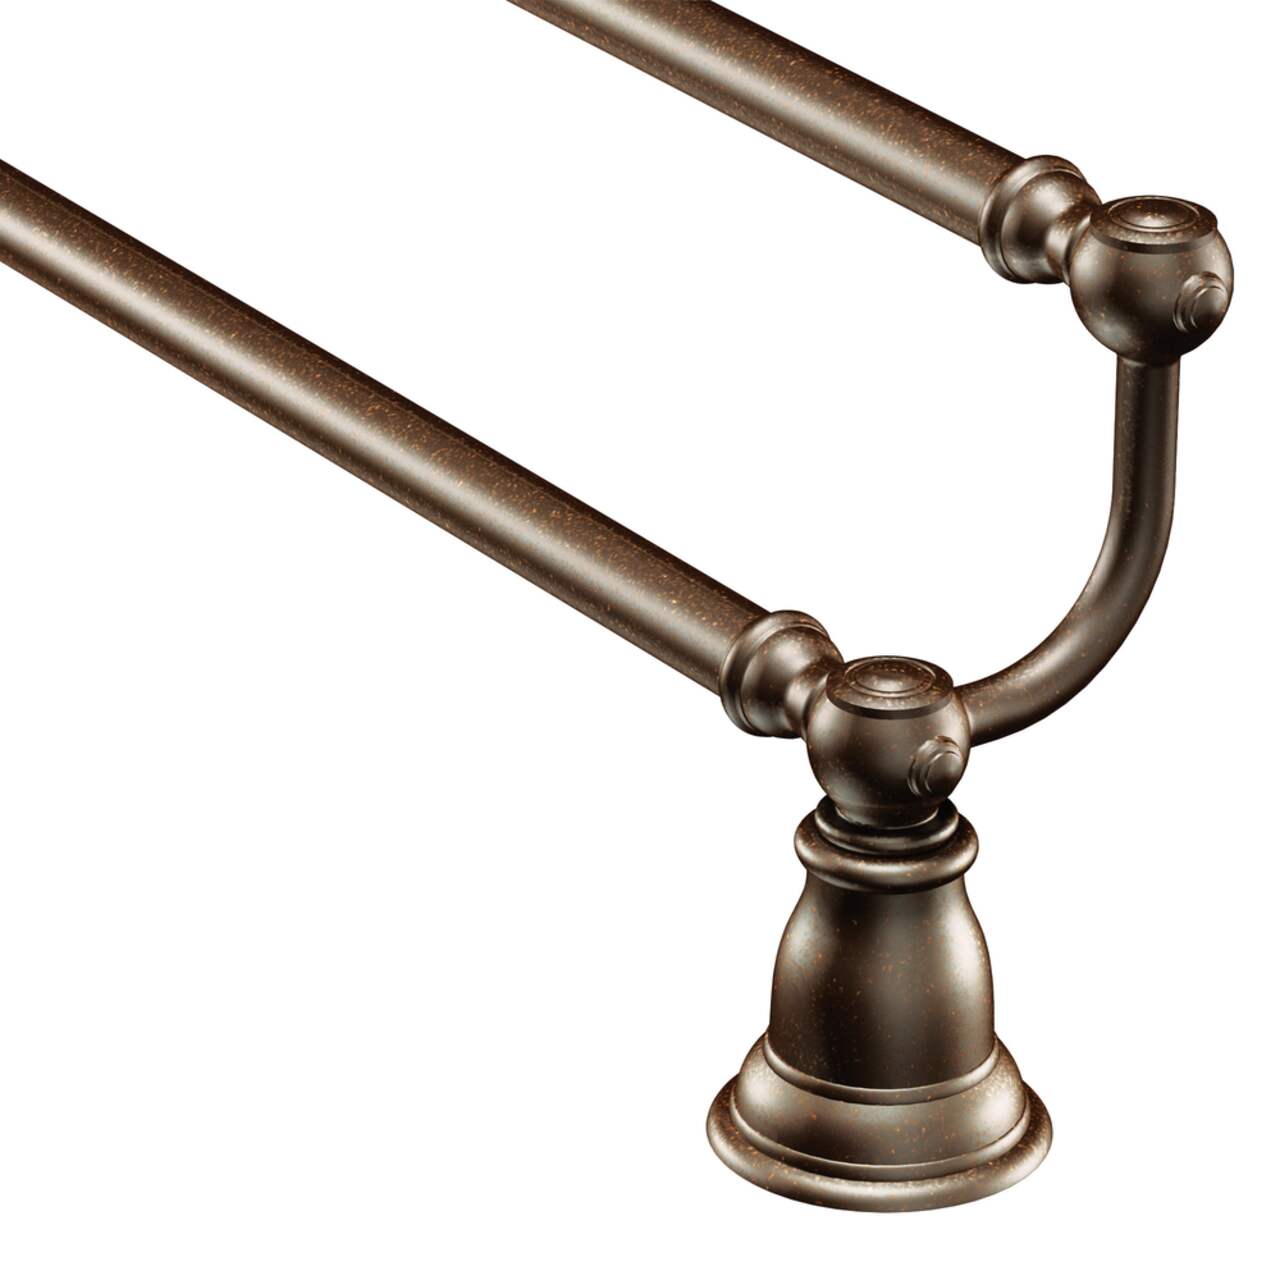 https://media-www.canadiantire.ca/product/fixing/plumbing/faucets-fixtures/5749958/moen-kingsley-24-double-towel-bar-oil-rubbed-bronze-bfdb44be-5bf9-4c8d-ad3e-01f6f9ea0879.png?imdensity=1&imwidth=640&impolicy=mZoom